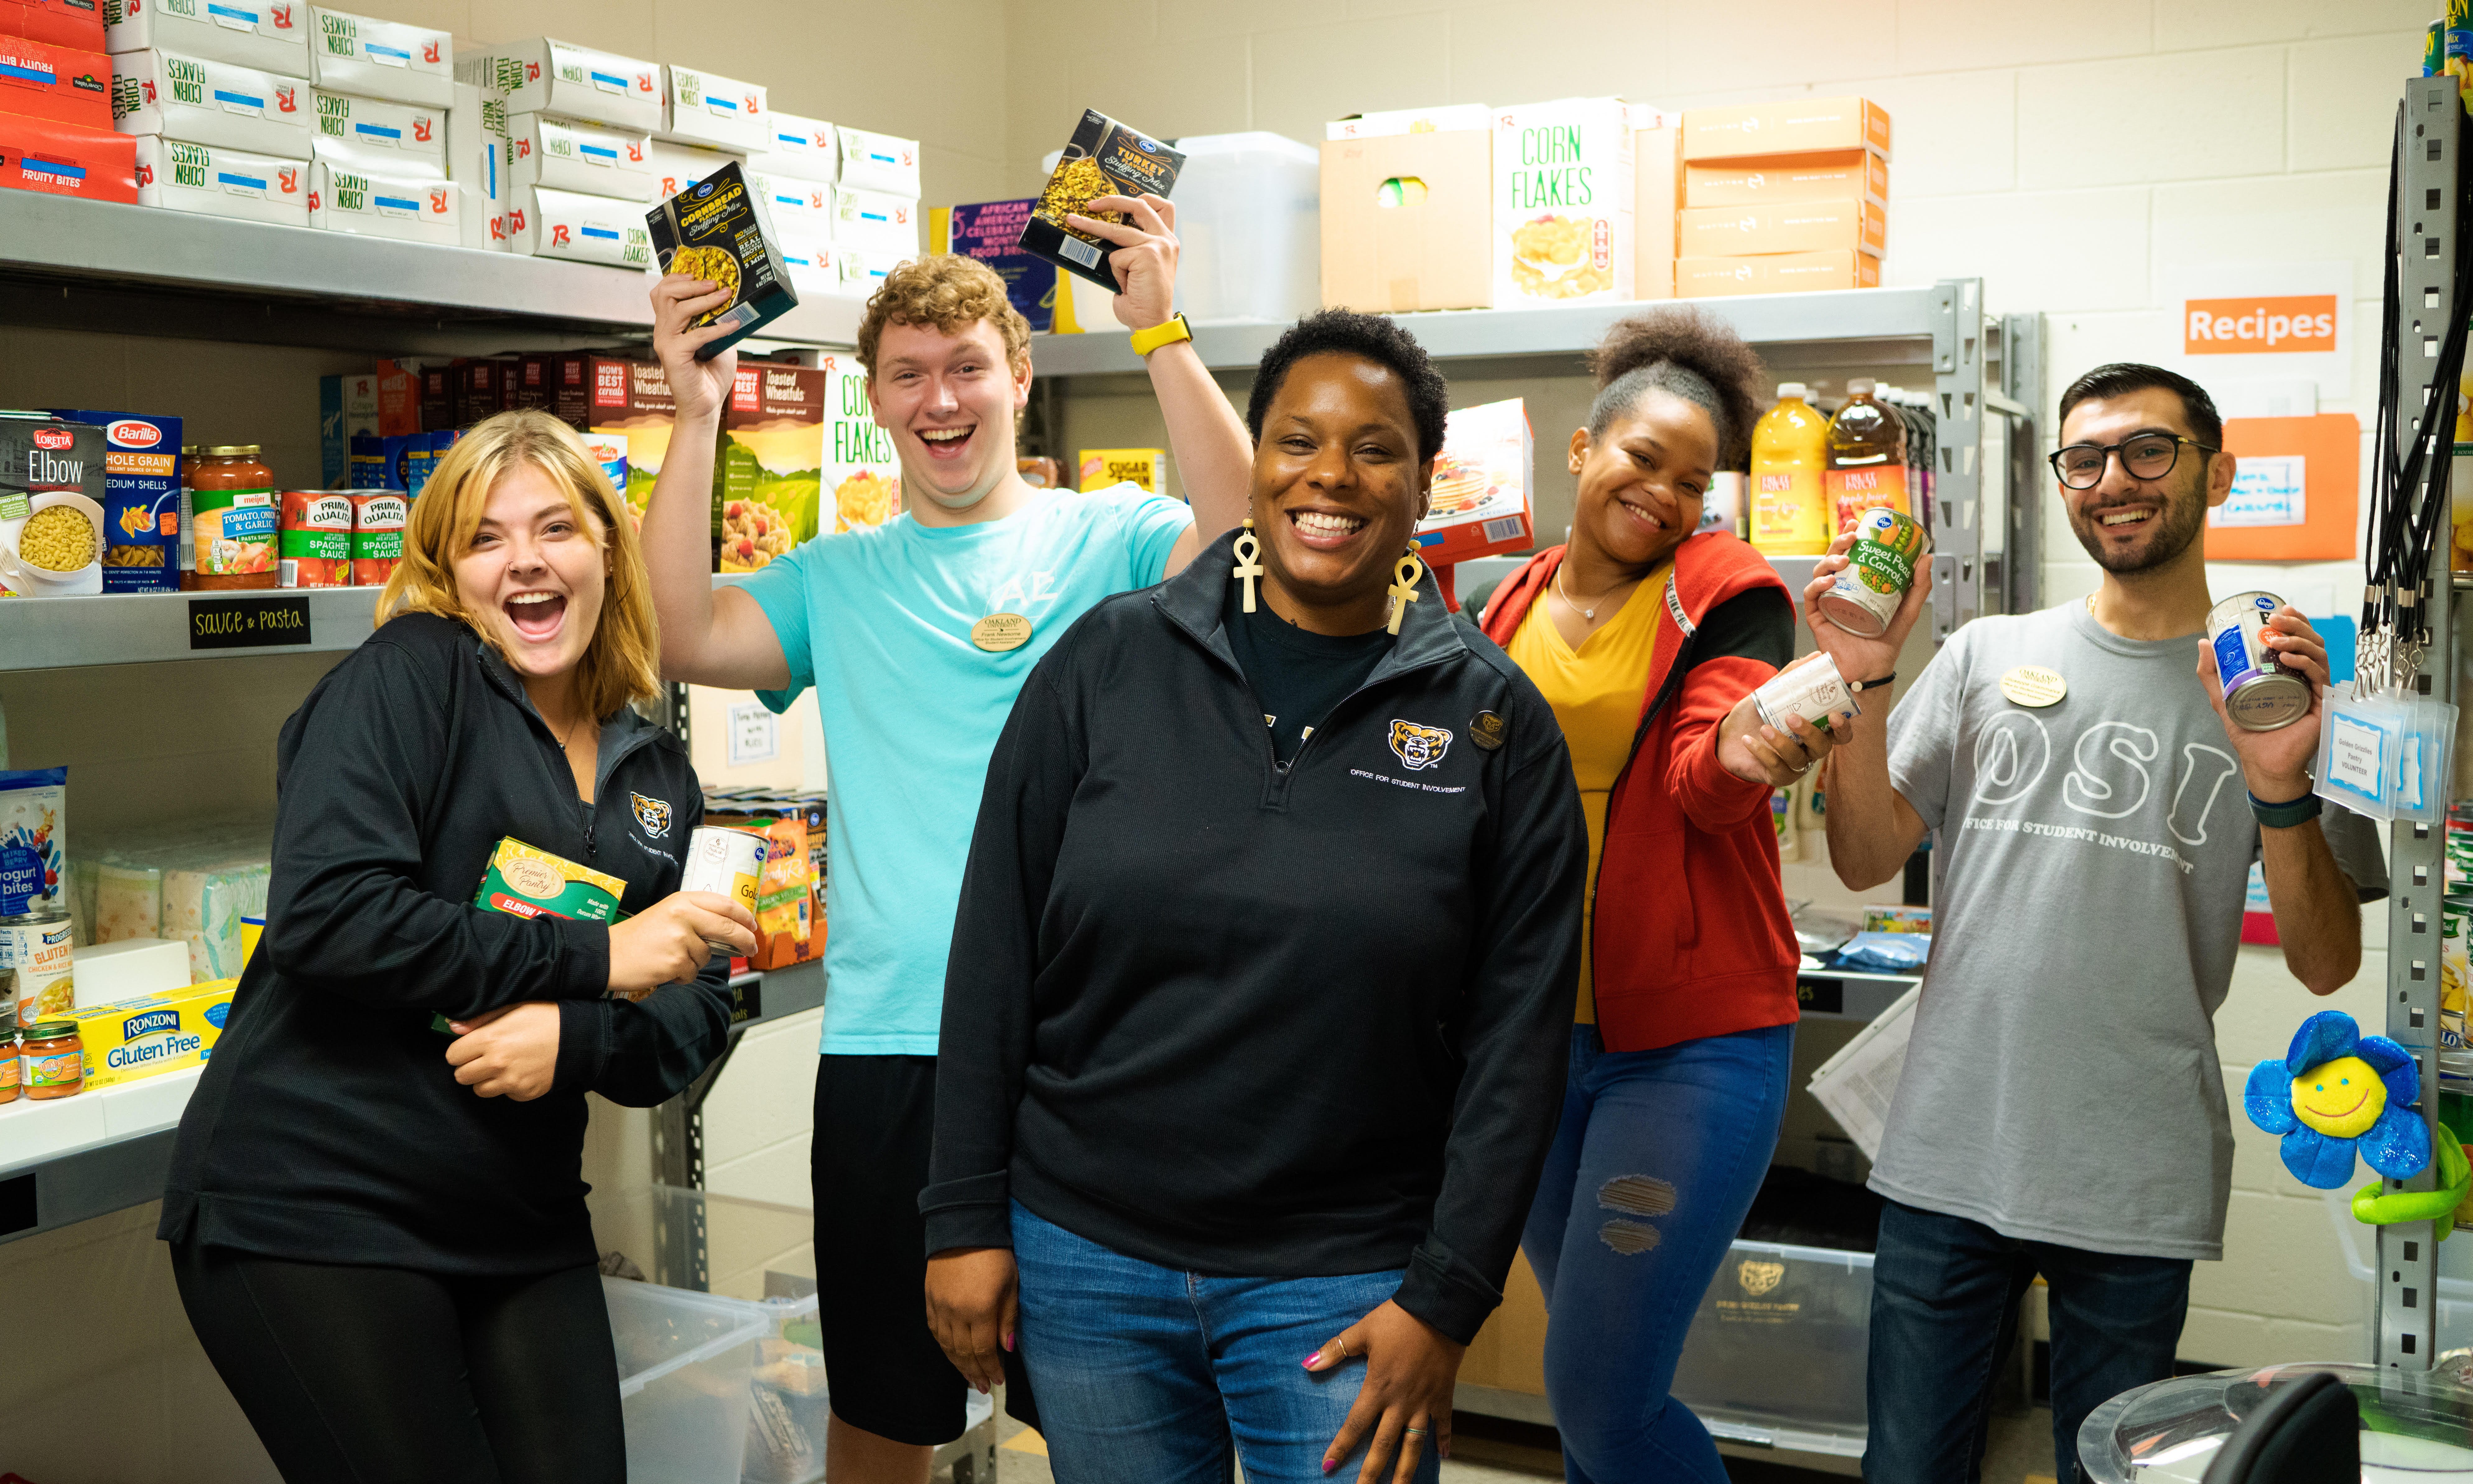 Raenece D. Johnson and students pose for a photo in a food pantry